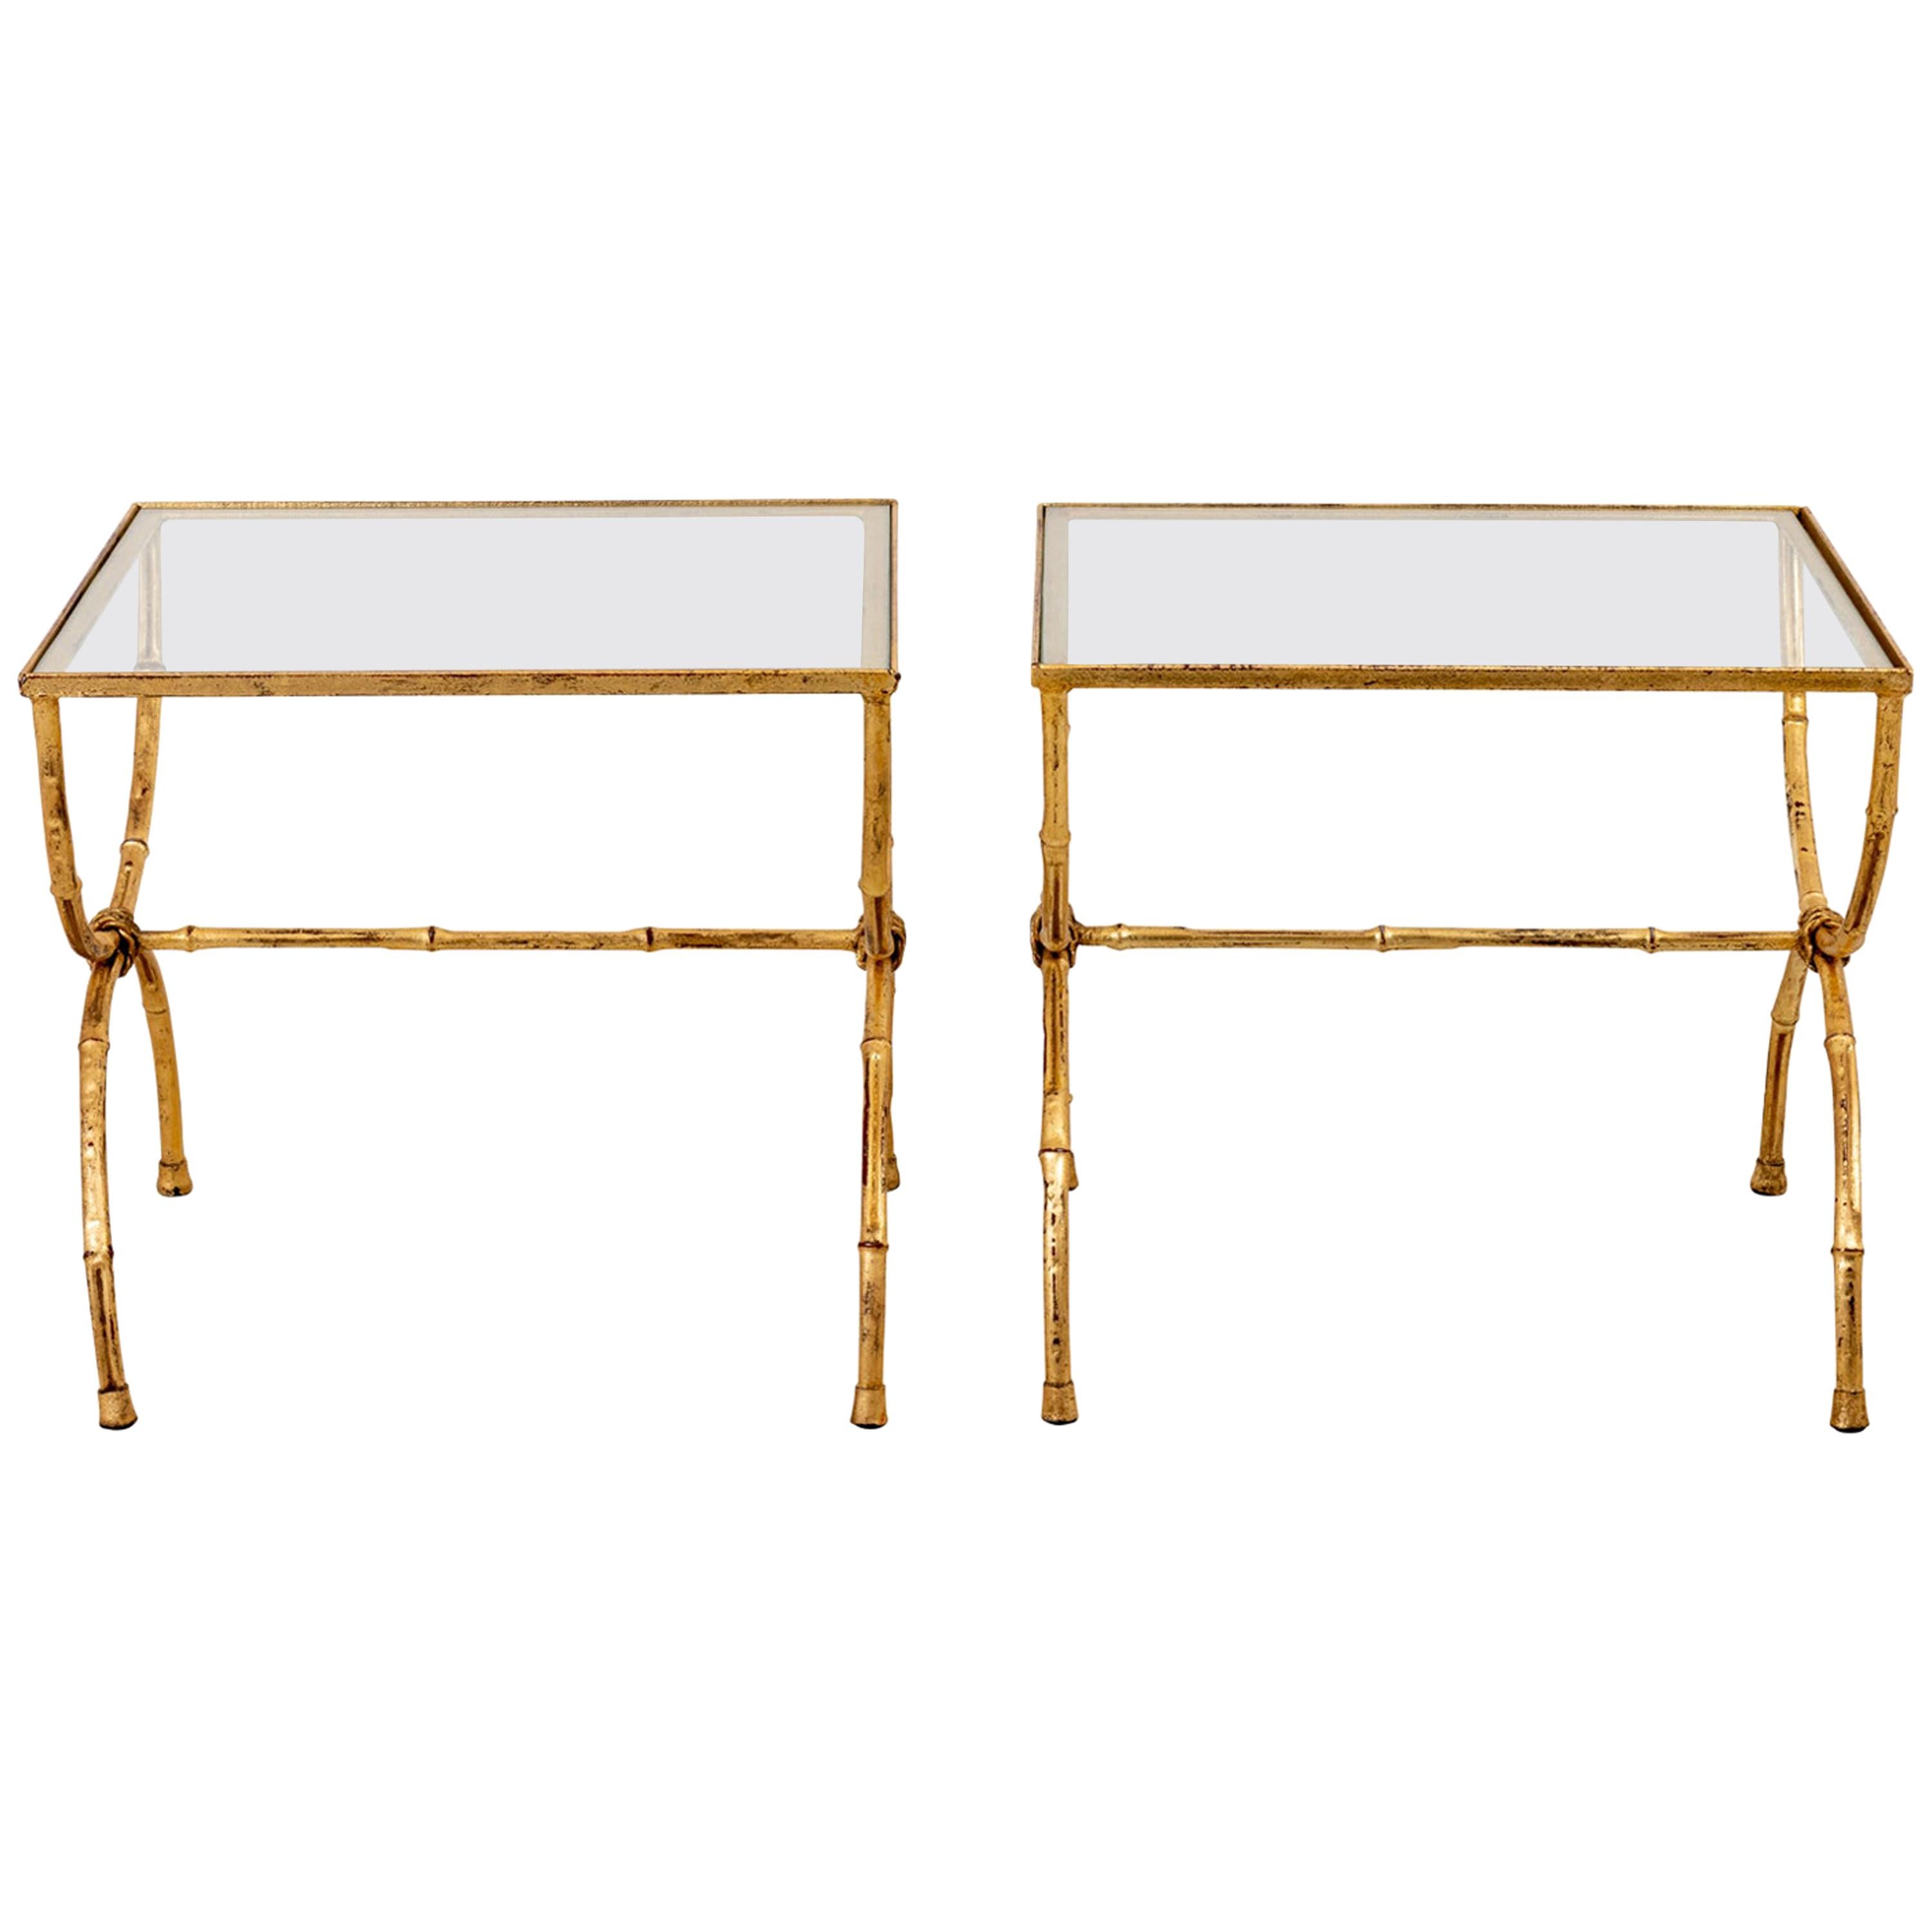 Pair of Hollywood Regency Style Faux Bamboo Tables